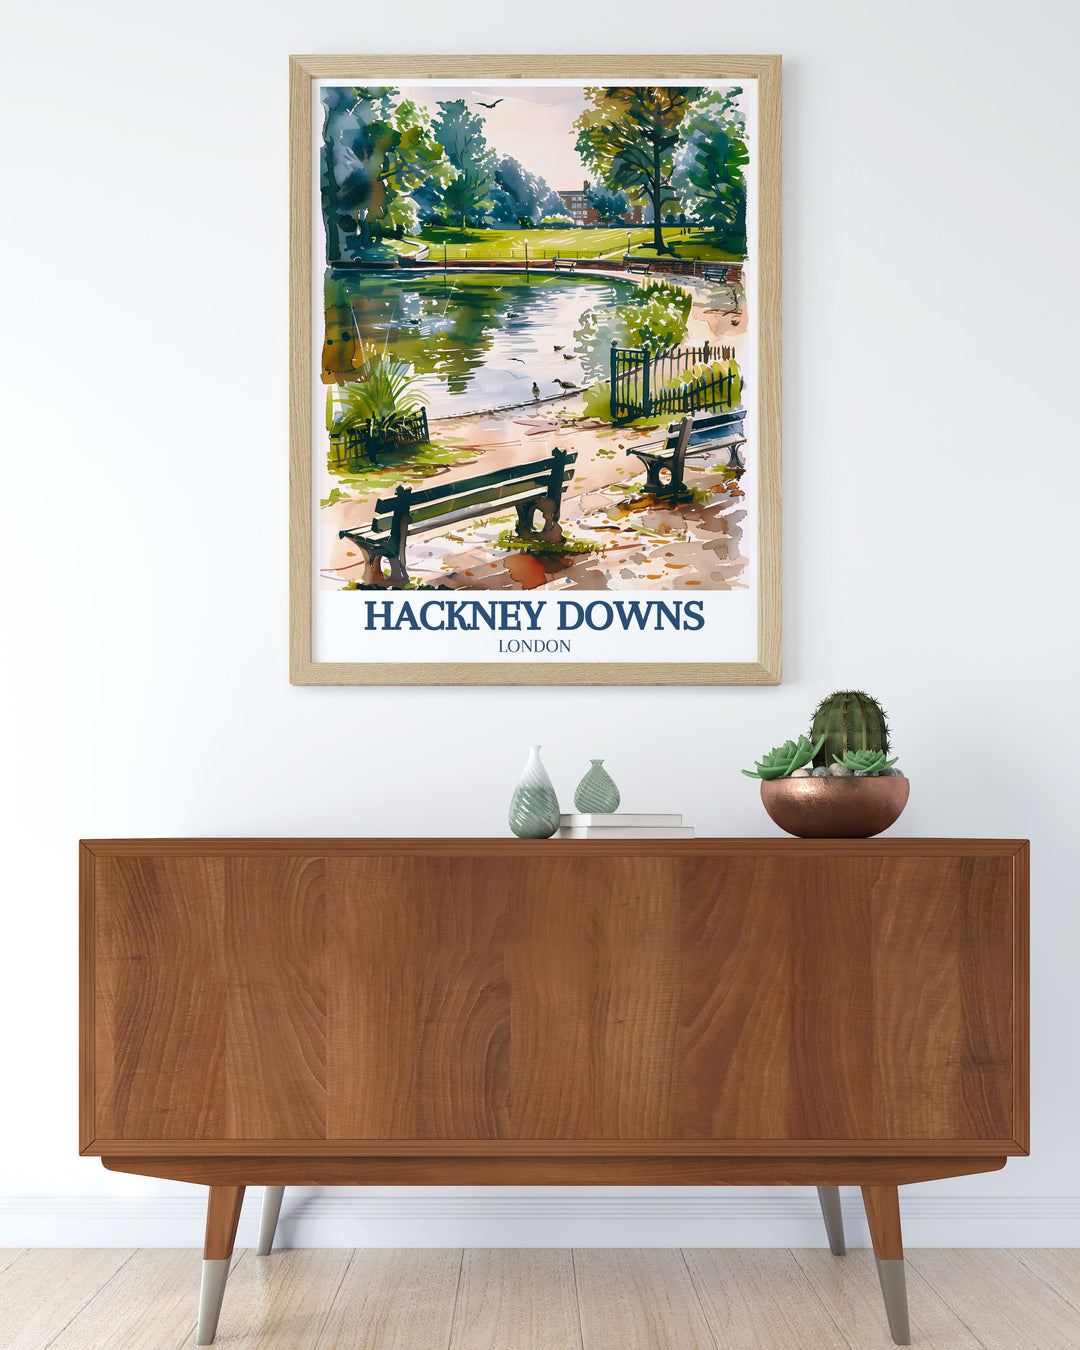 Highlighting the cultural and natural beauty of Hackney Downs, this travel poster offers a captivating view of Londons historic park, ideal for those who appreciate scenic art.